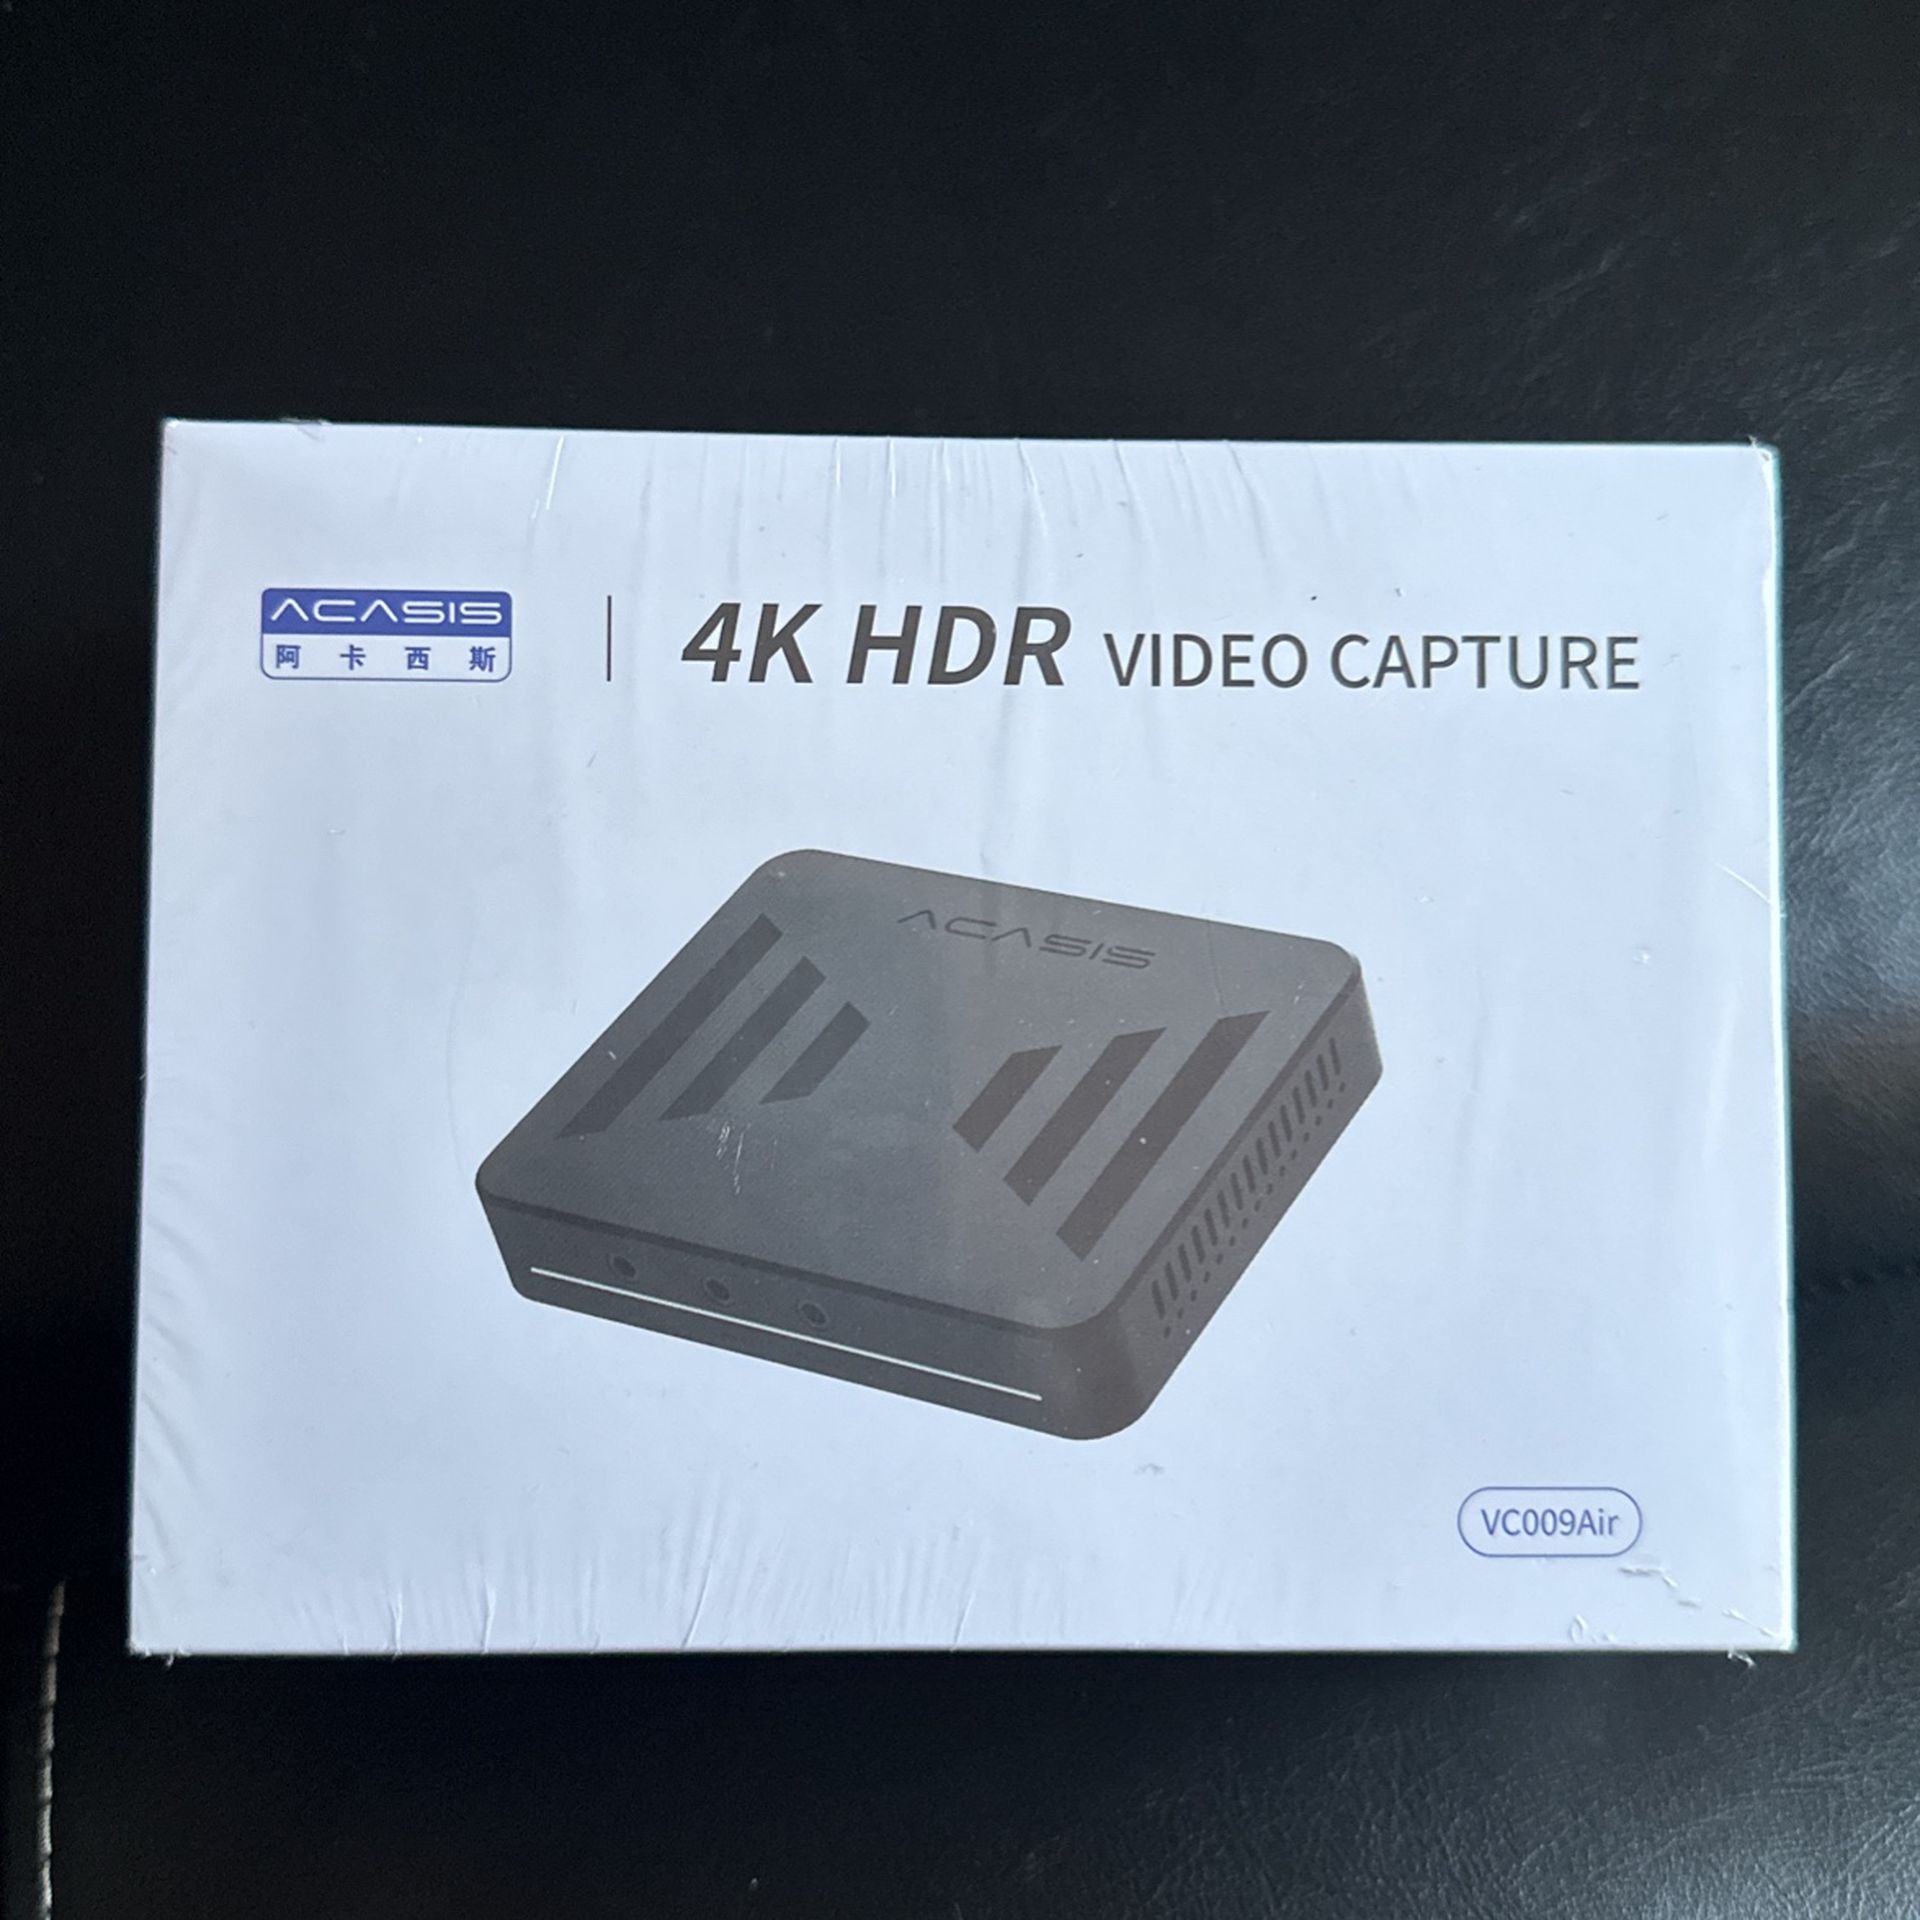 4k HDR VIDEO CATURE 